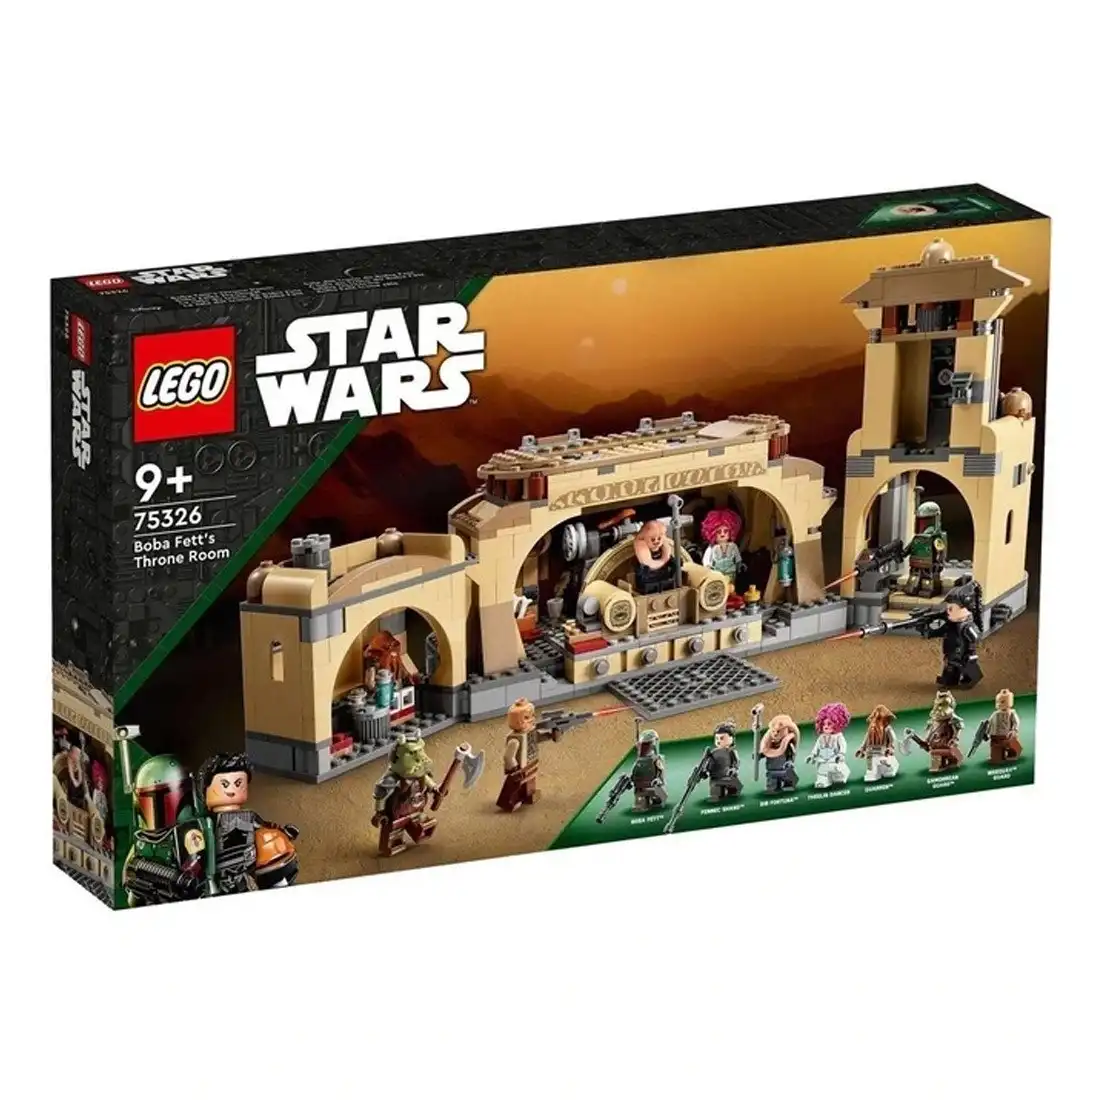 LEGO Star Wars Boba Fett's Throne Room Buildable Toy (75326)